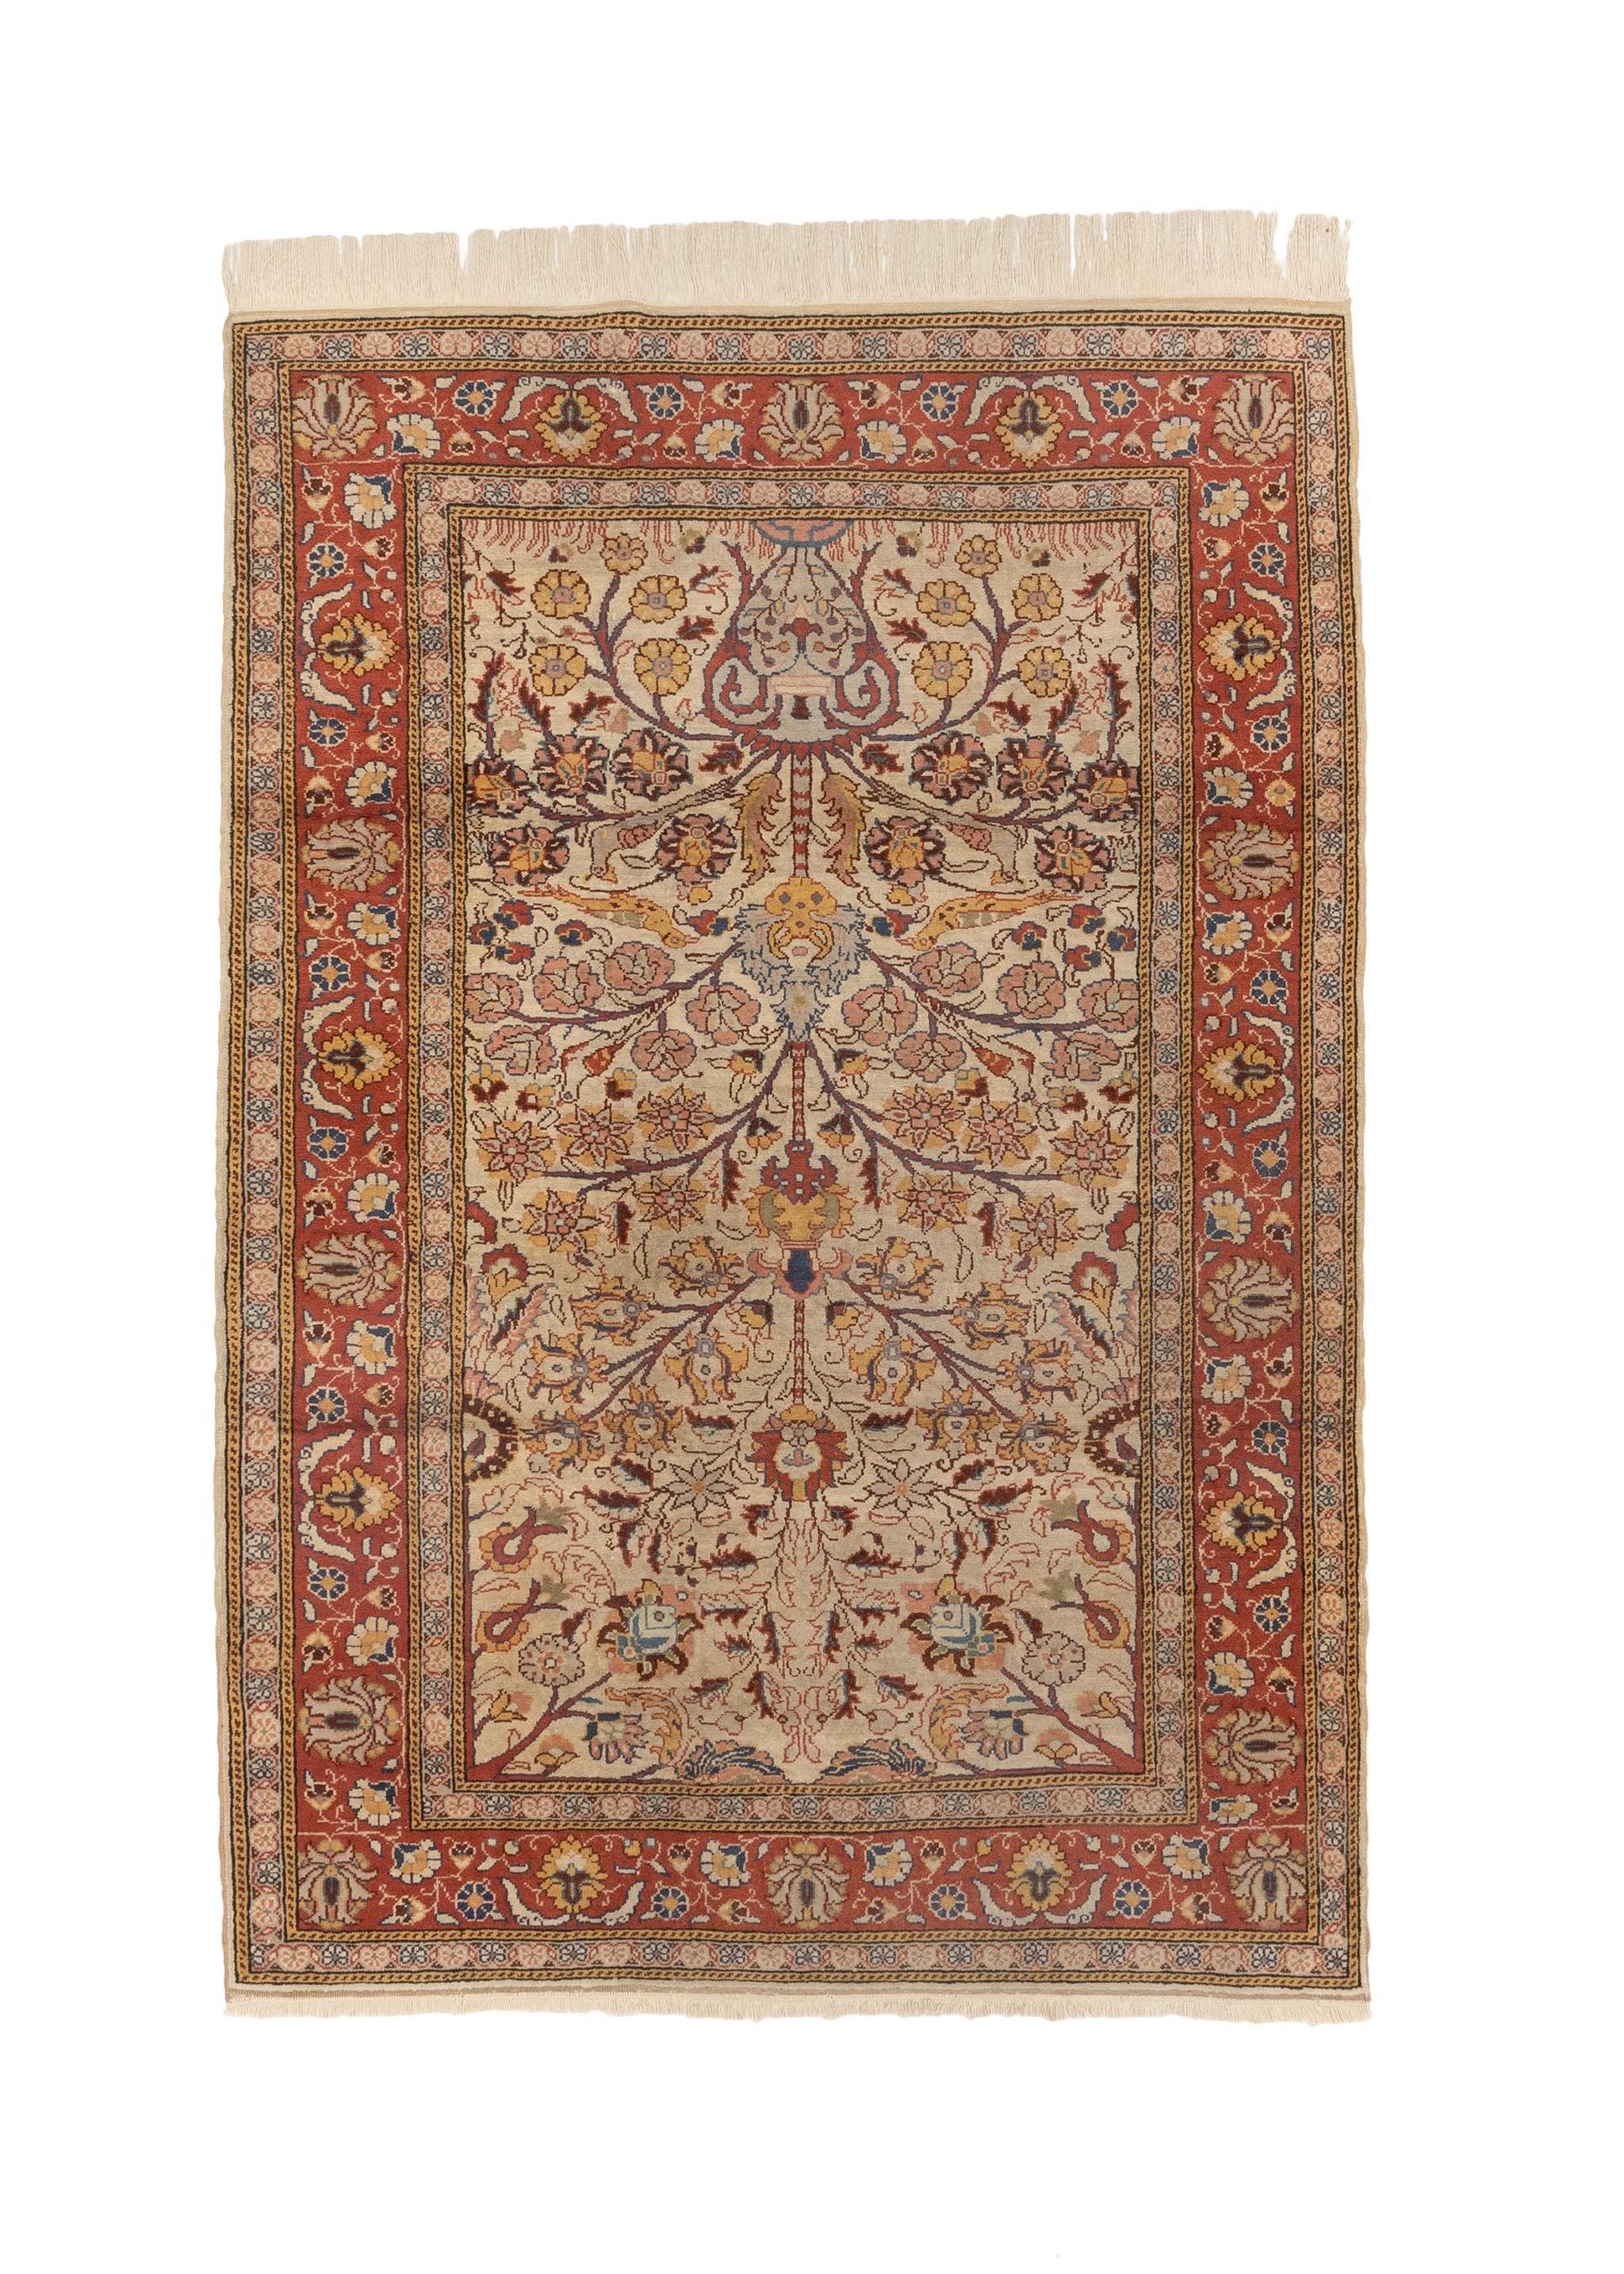 Exquisite Turkish Handmade Silk Rug 1920s In Good Condition For Sale In Los Angeles, CA